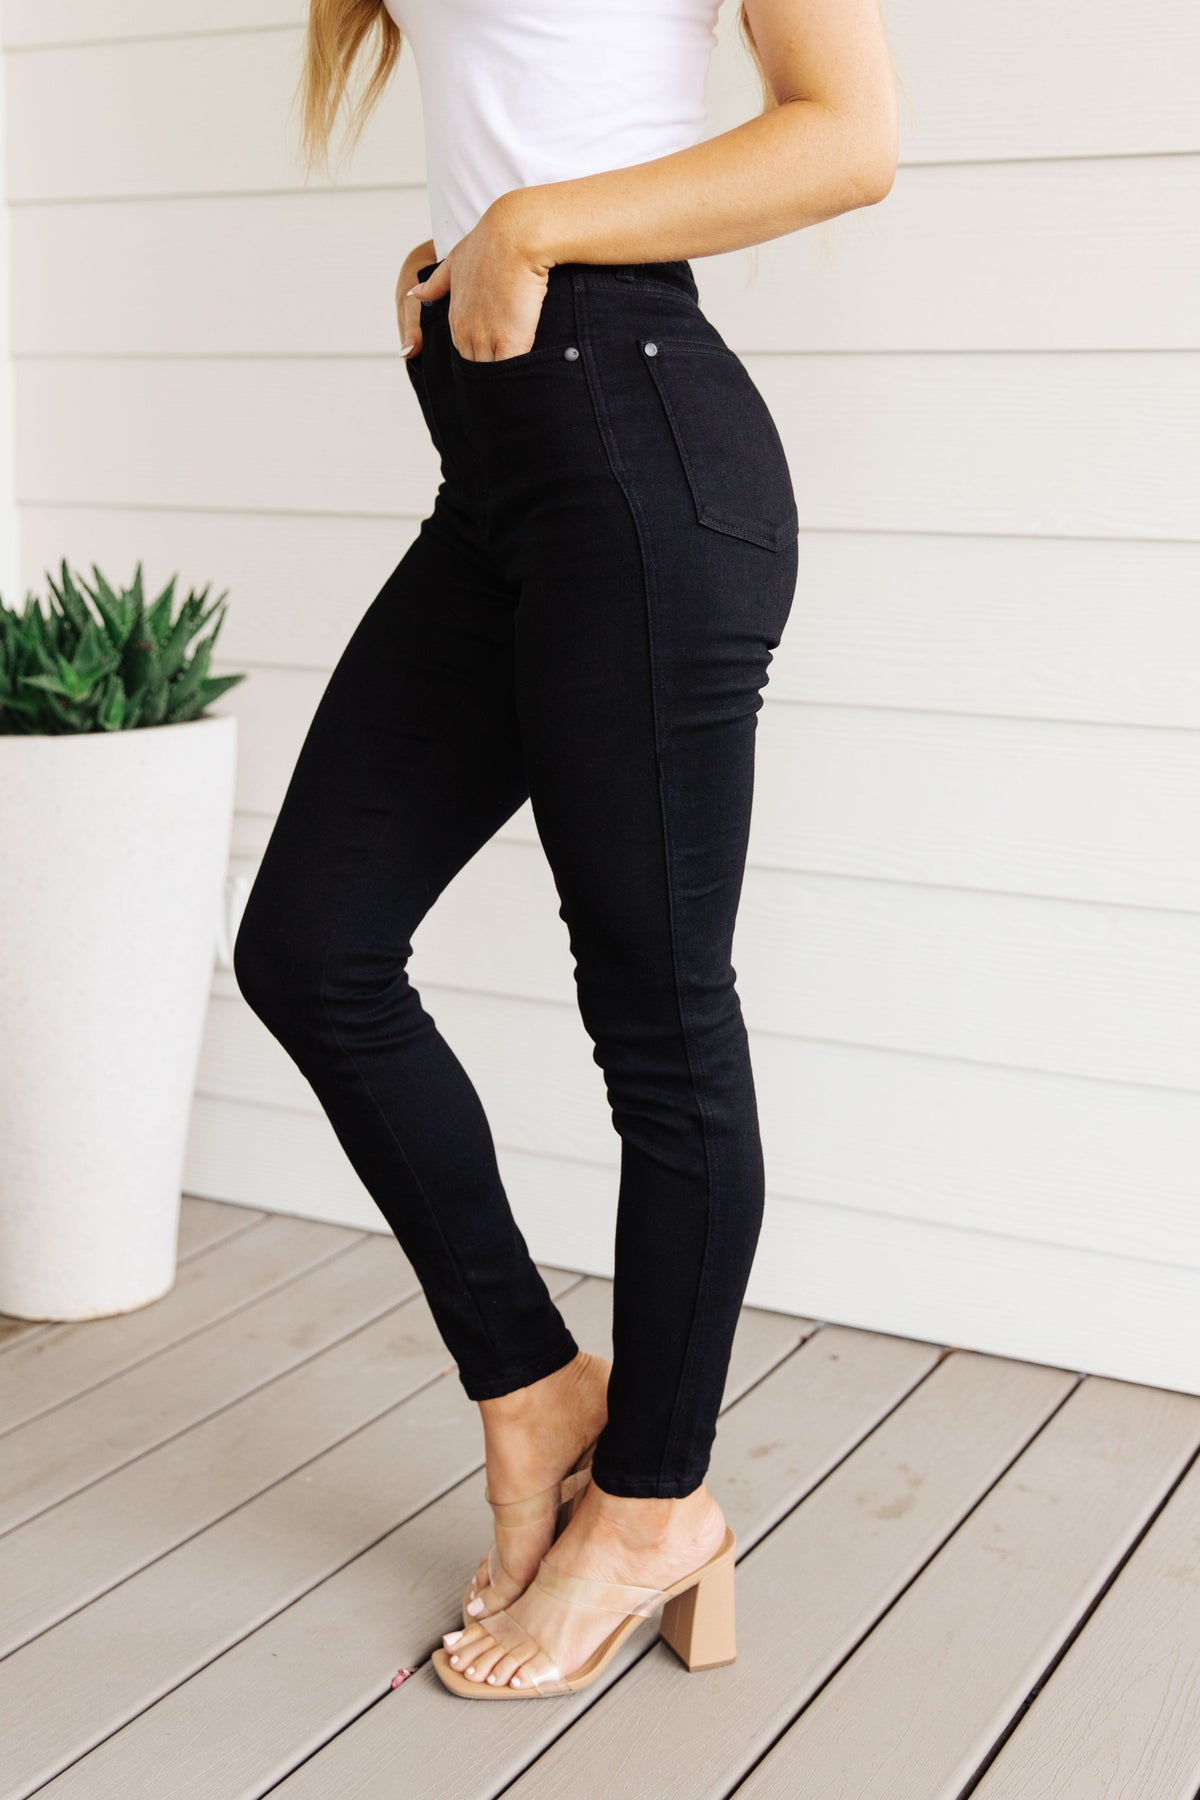 Judy Blue High Rise Control Top Classic Skinny Jeans in Black